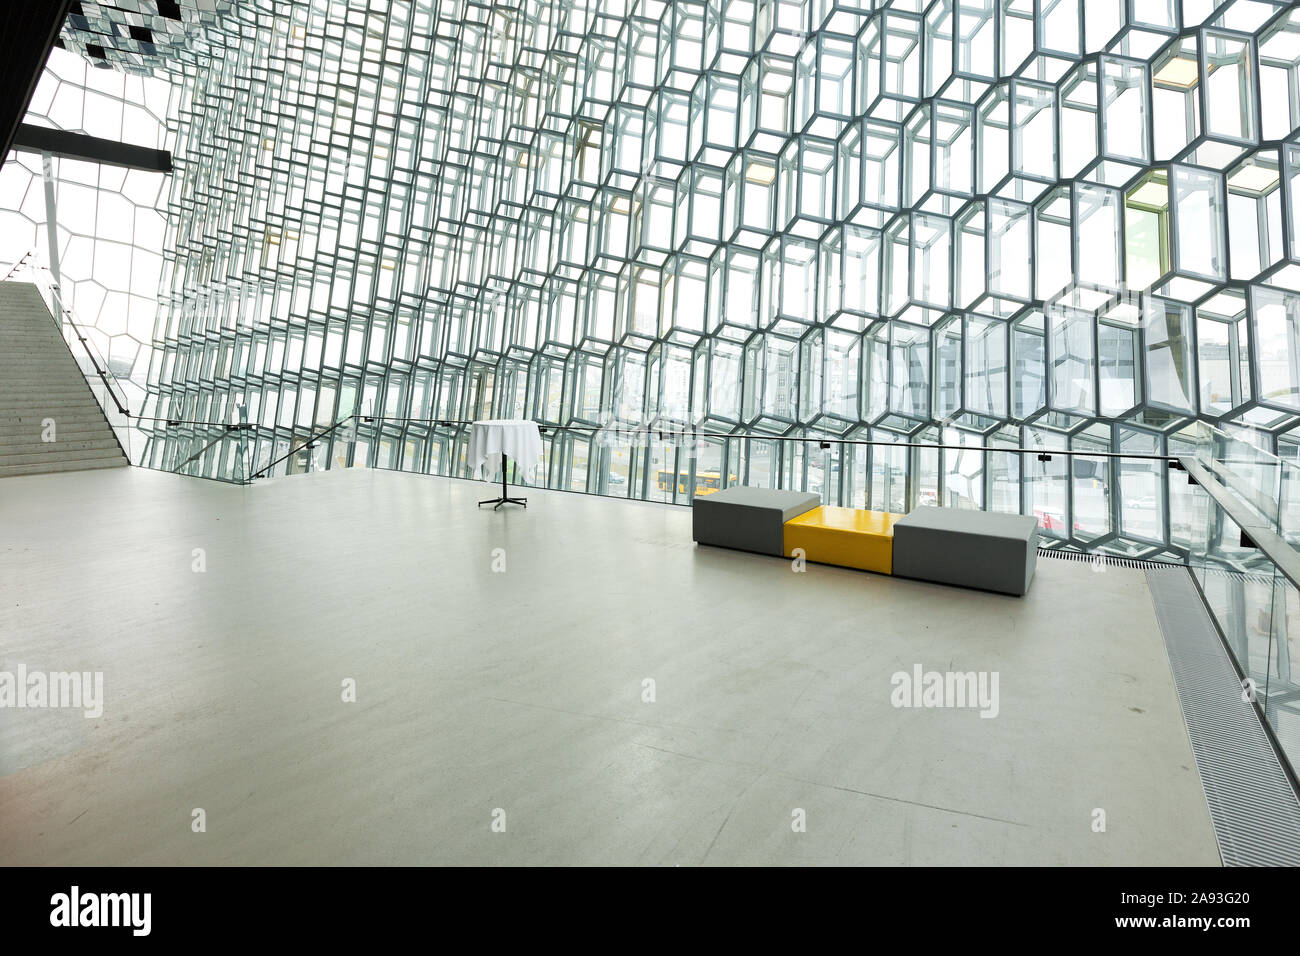 Geodesic interior of Harpa Concert Hall and Conference Centre a modern architectural wonder of Danish Henning Larsen Architects by visual artist Olafu Stock Photo